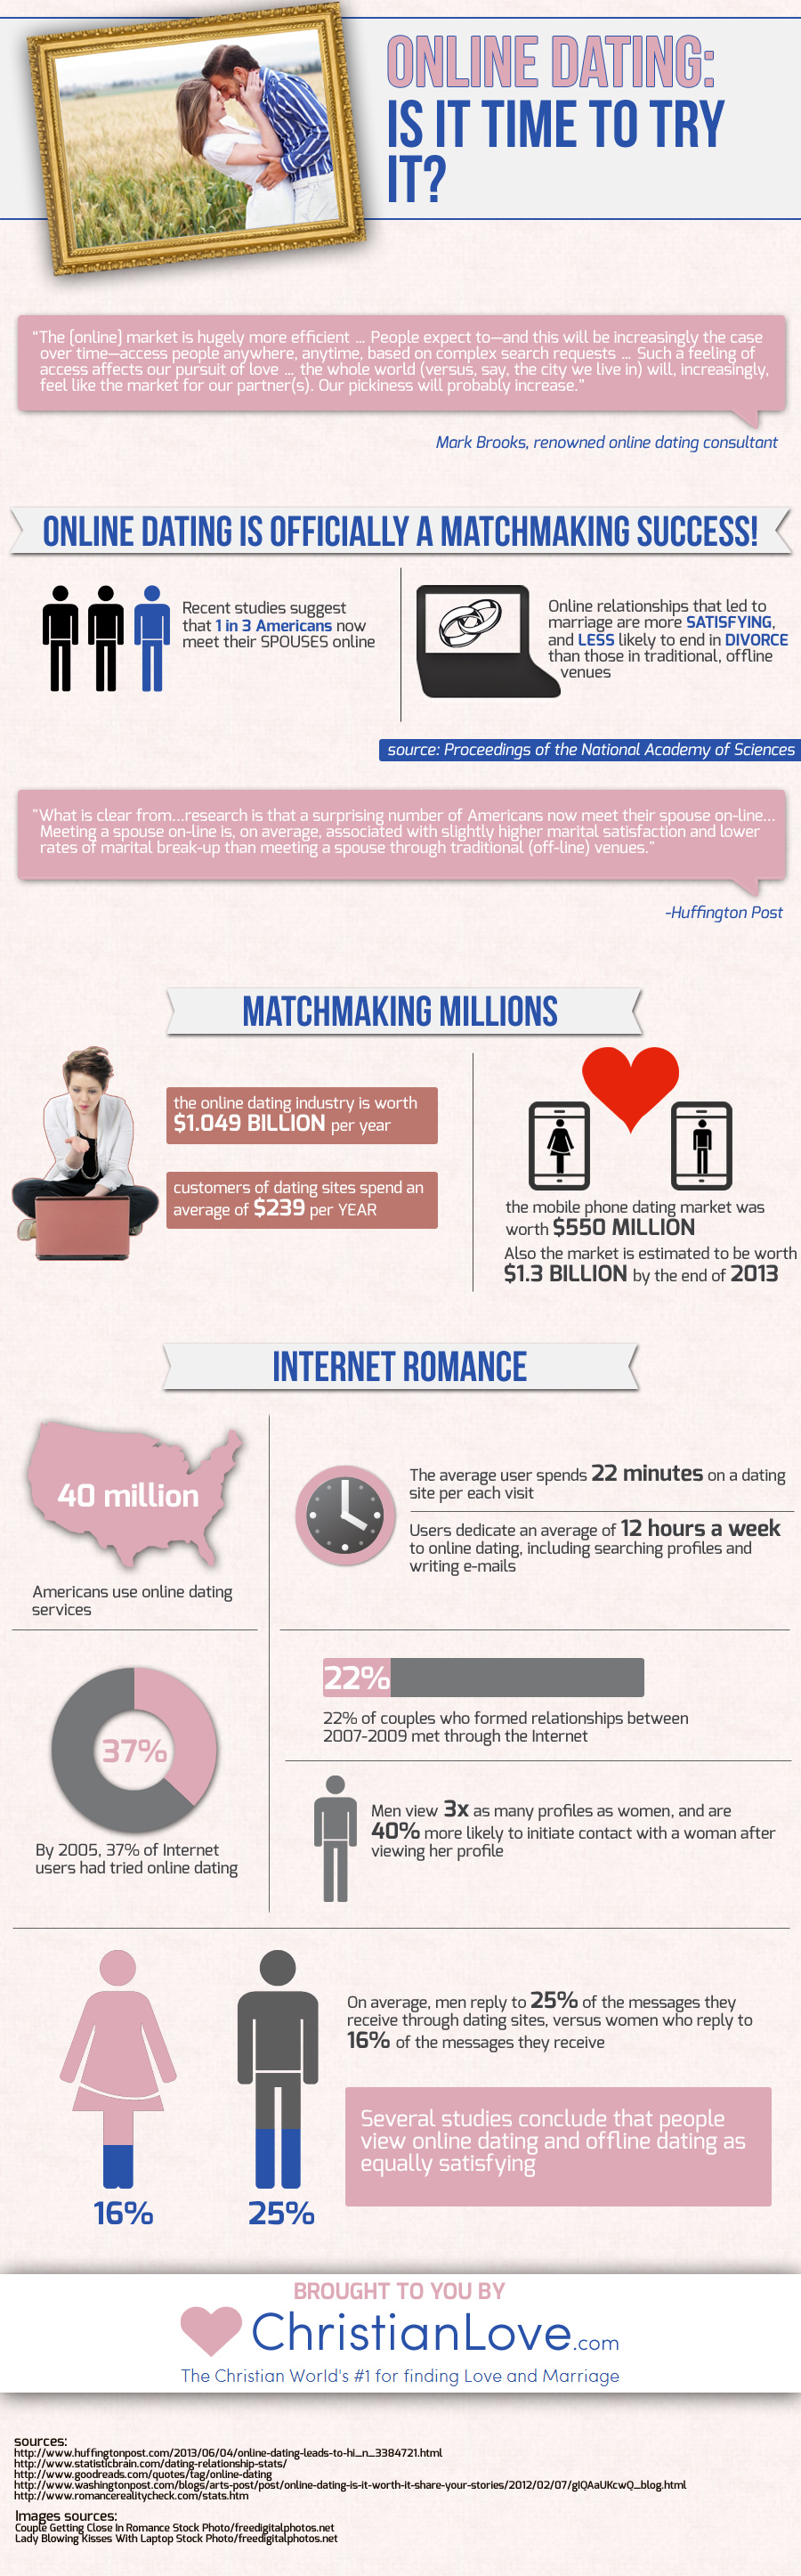 Online Dating: Is it Time to Try it?